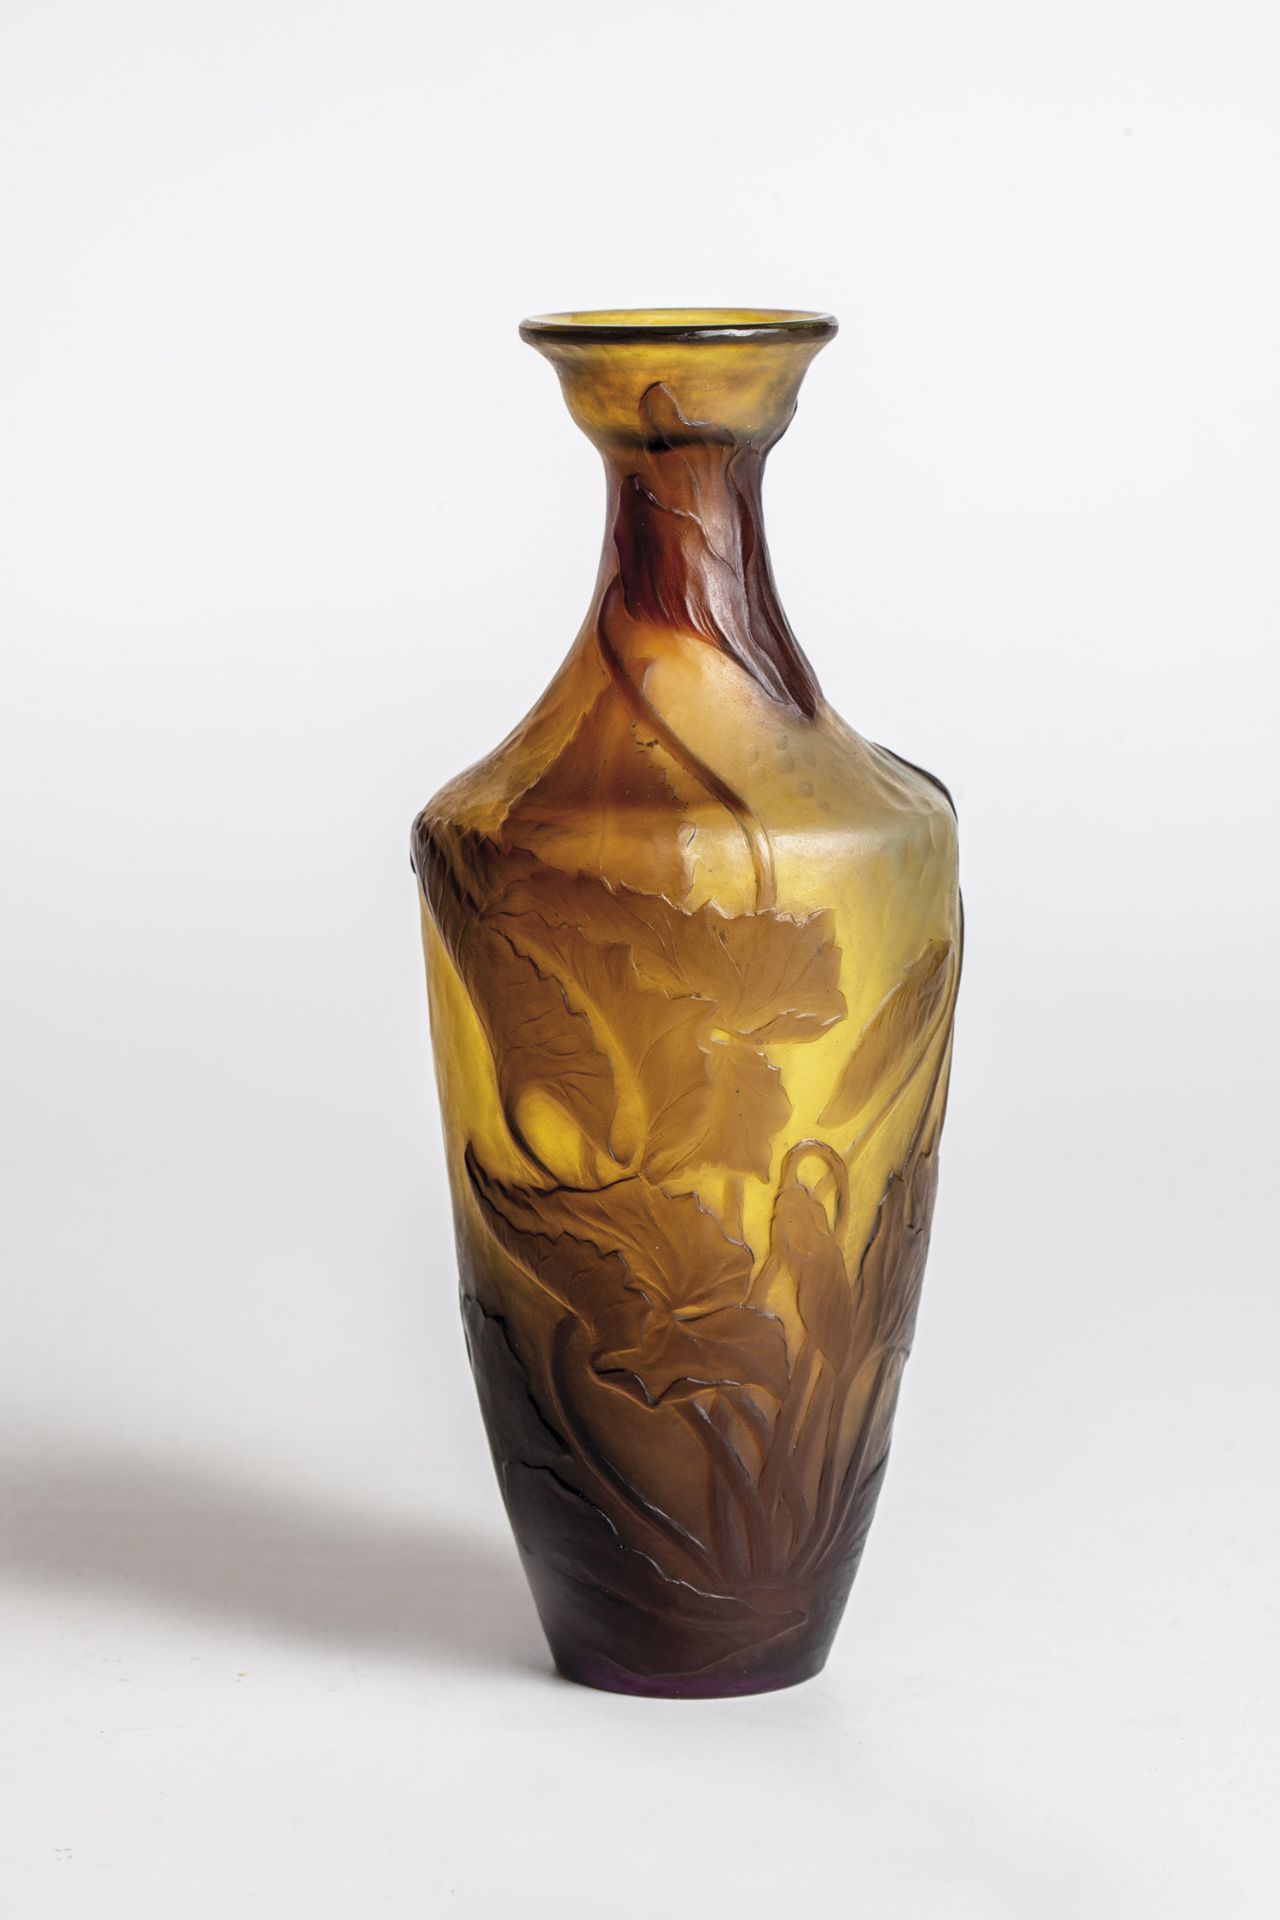 Rare Vase with Cyclamen Emile Galle, Nancy, circa 1900 Colorless glass, yellow opalescent underlay